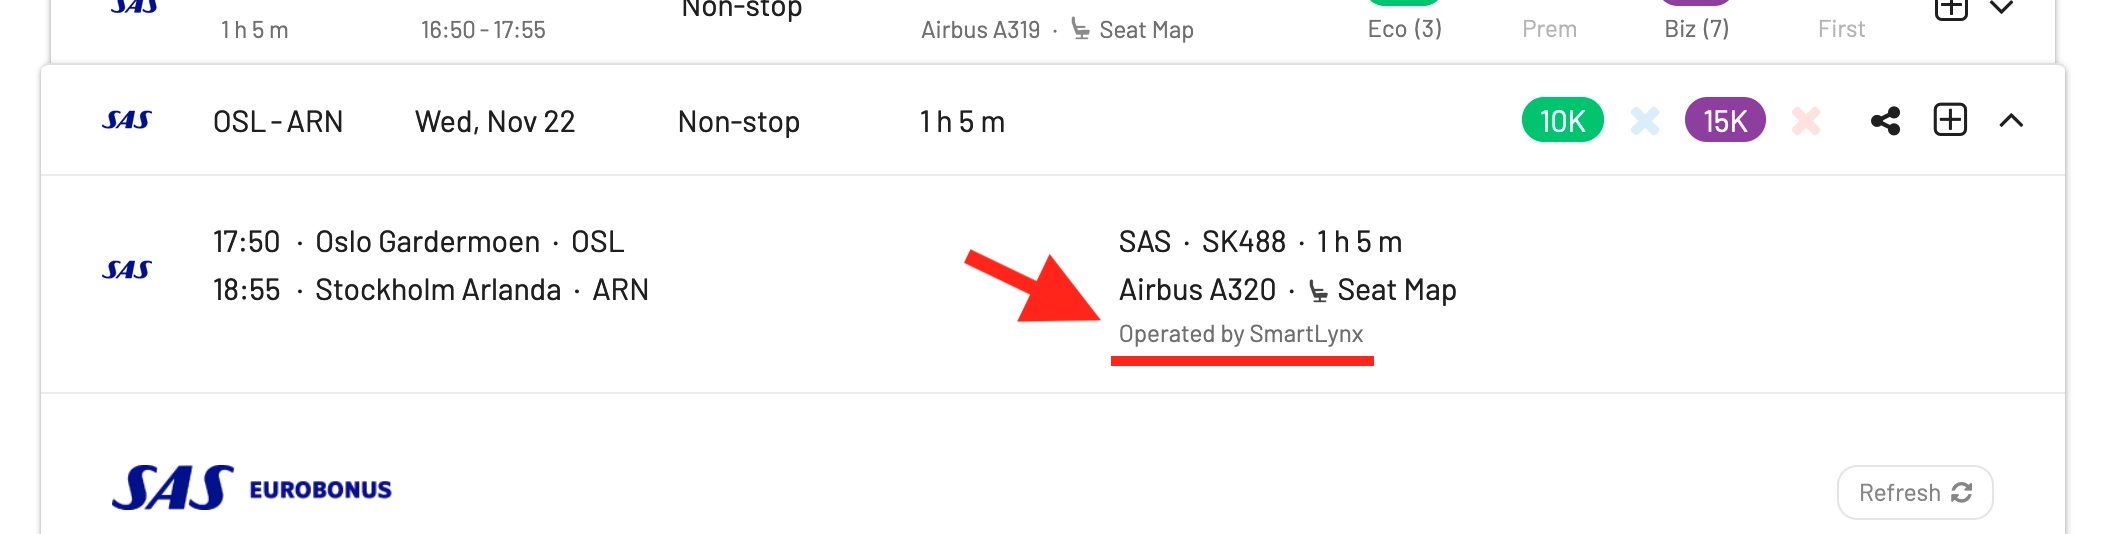 AwardFares now shows Operated By when the flight is performed by a subsidiary airline (SAS).